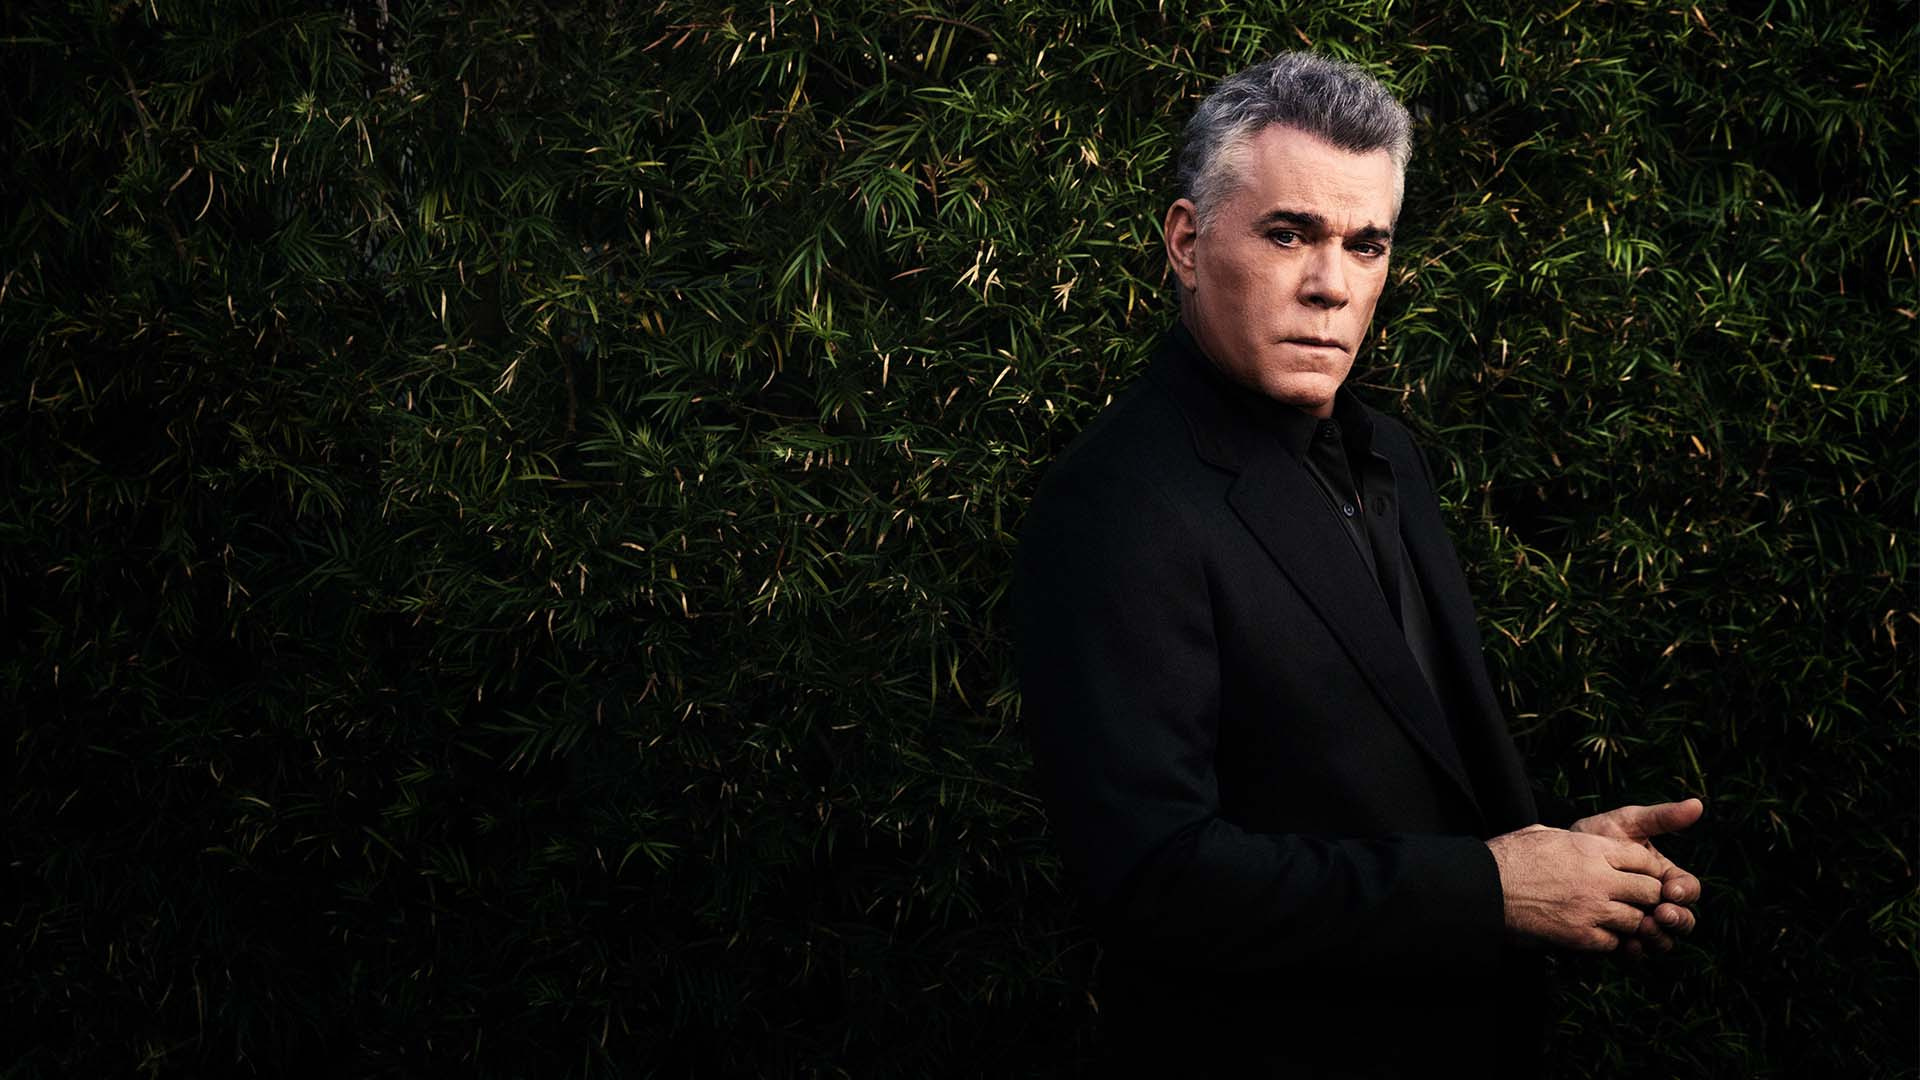 Ray Liotta: Starred in The Son of No One as Captain Marion Mathers in 2011. 1920x1080 Full HD Wallpaper.